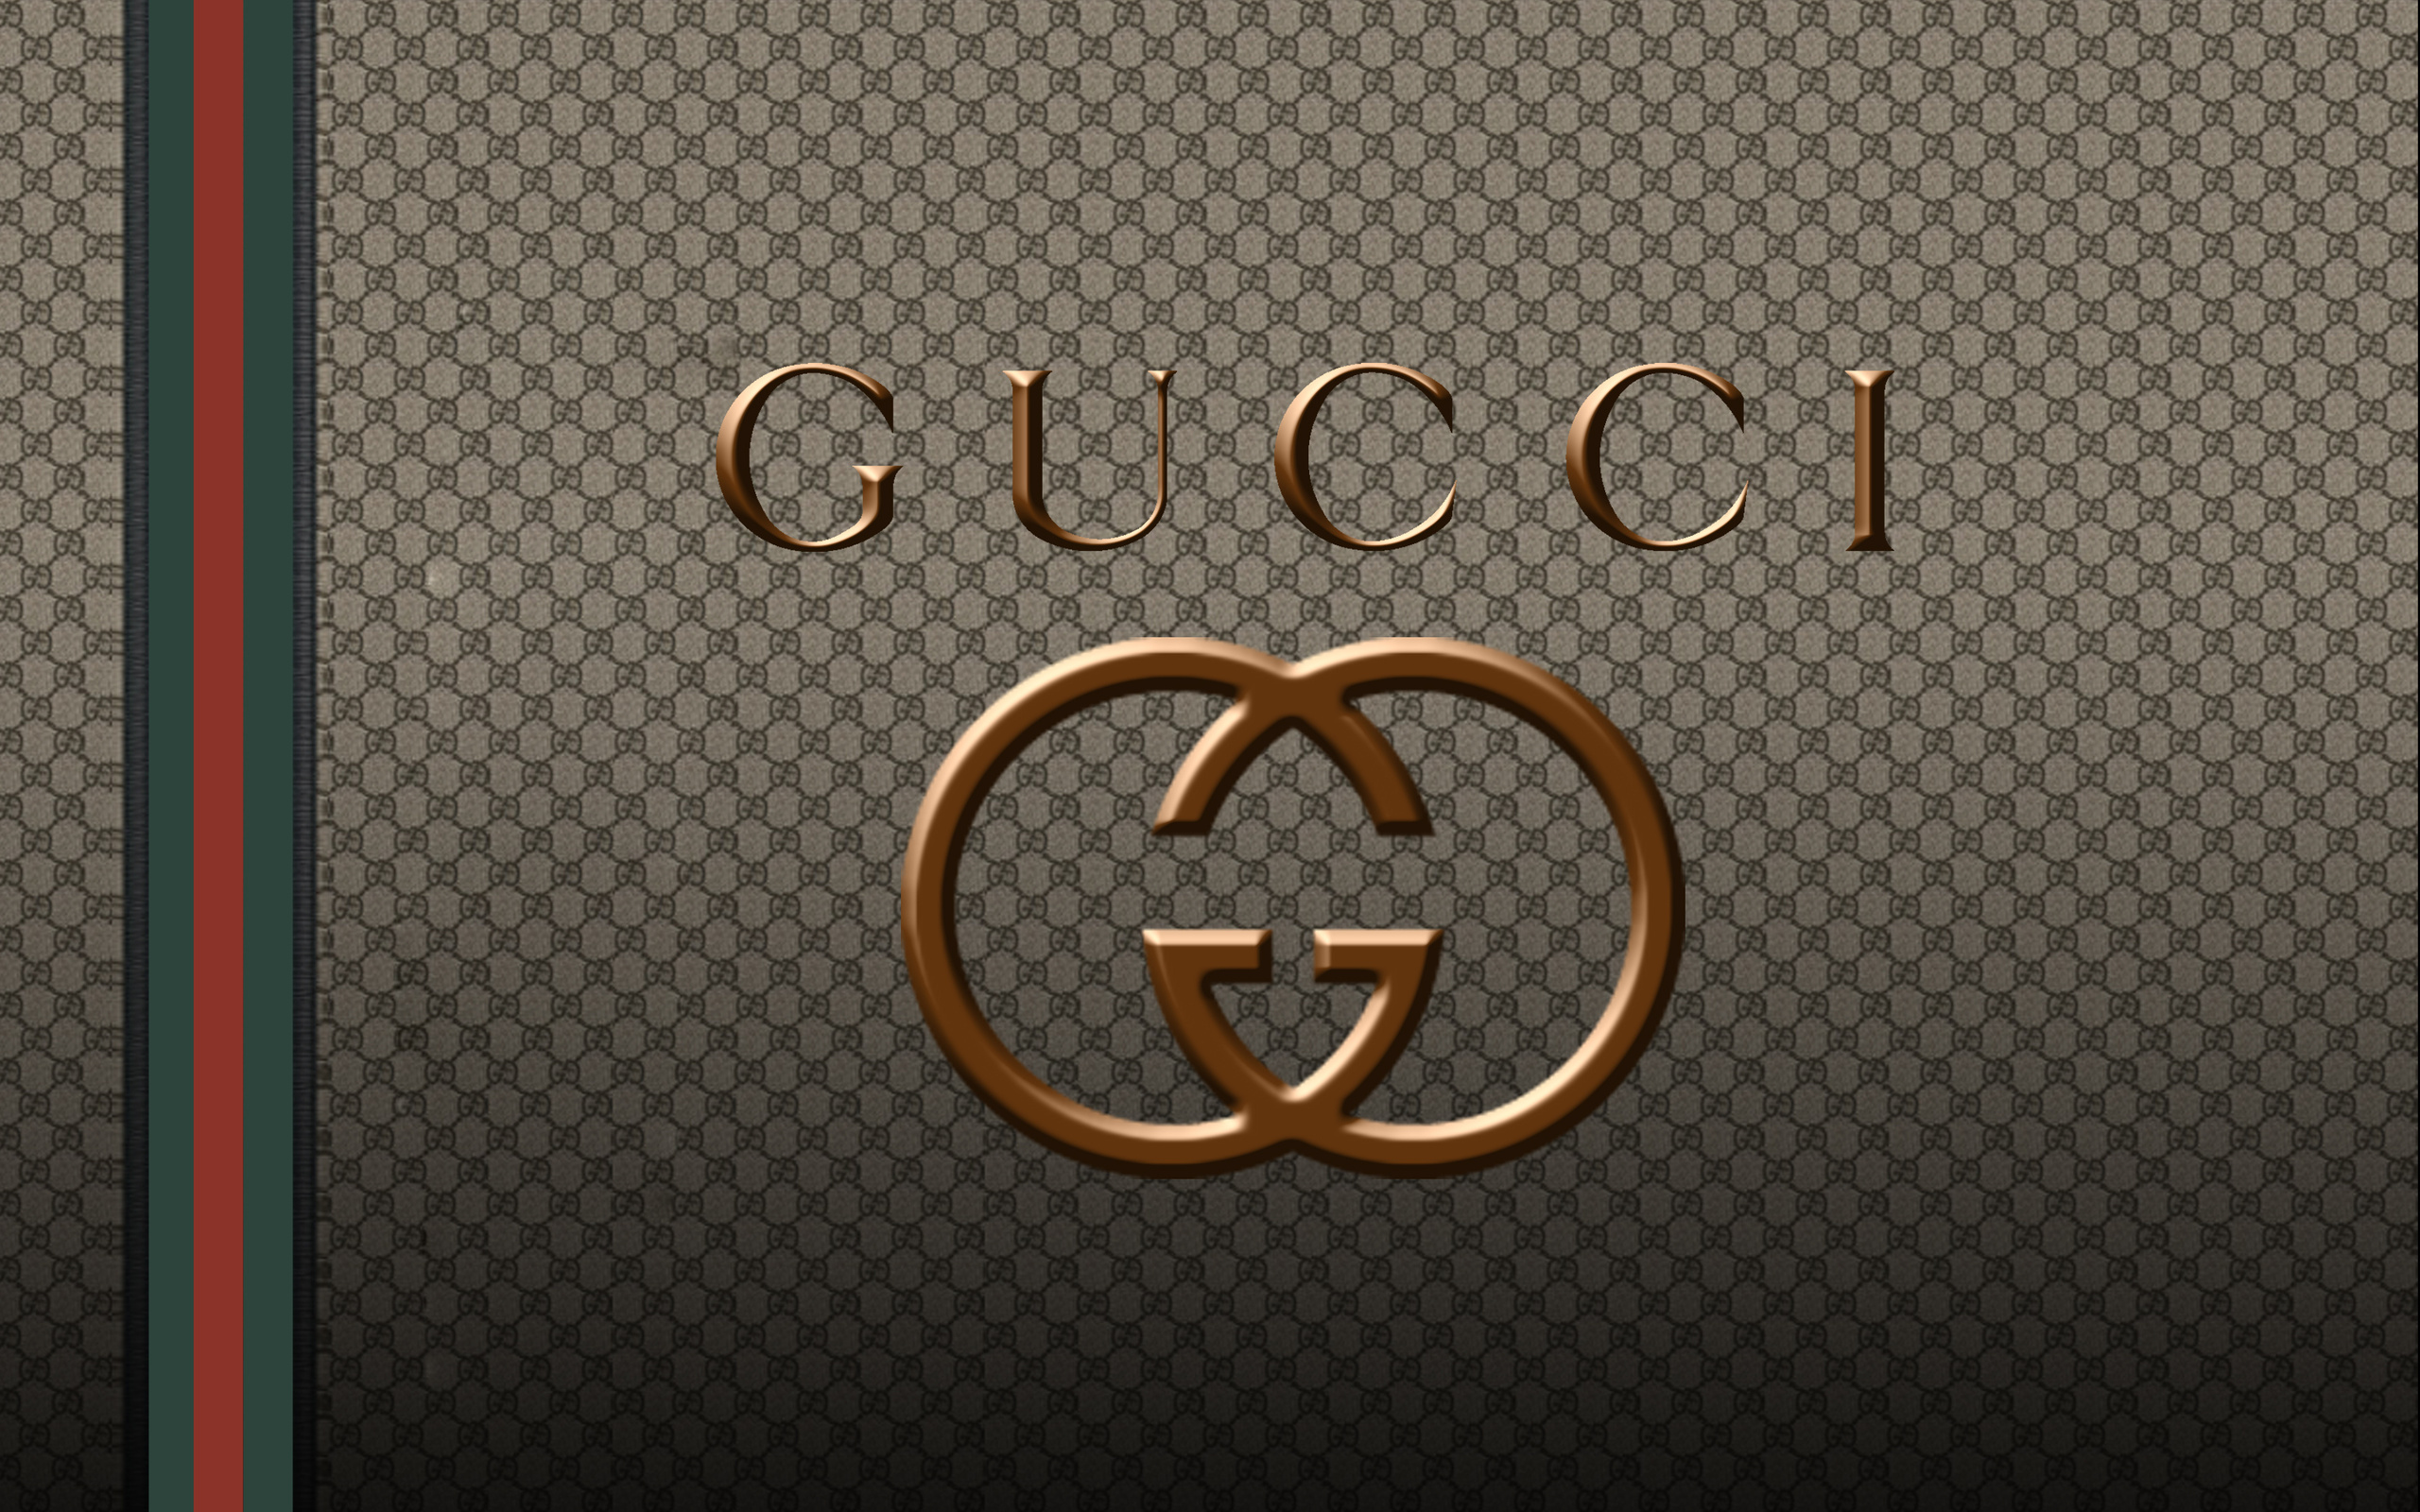 former employee sues gucci